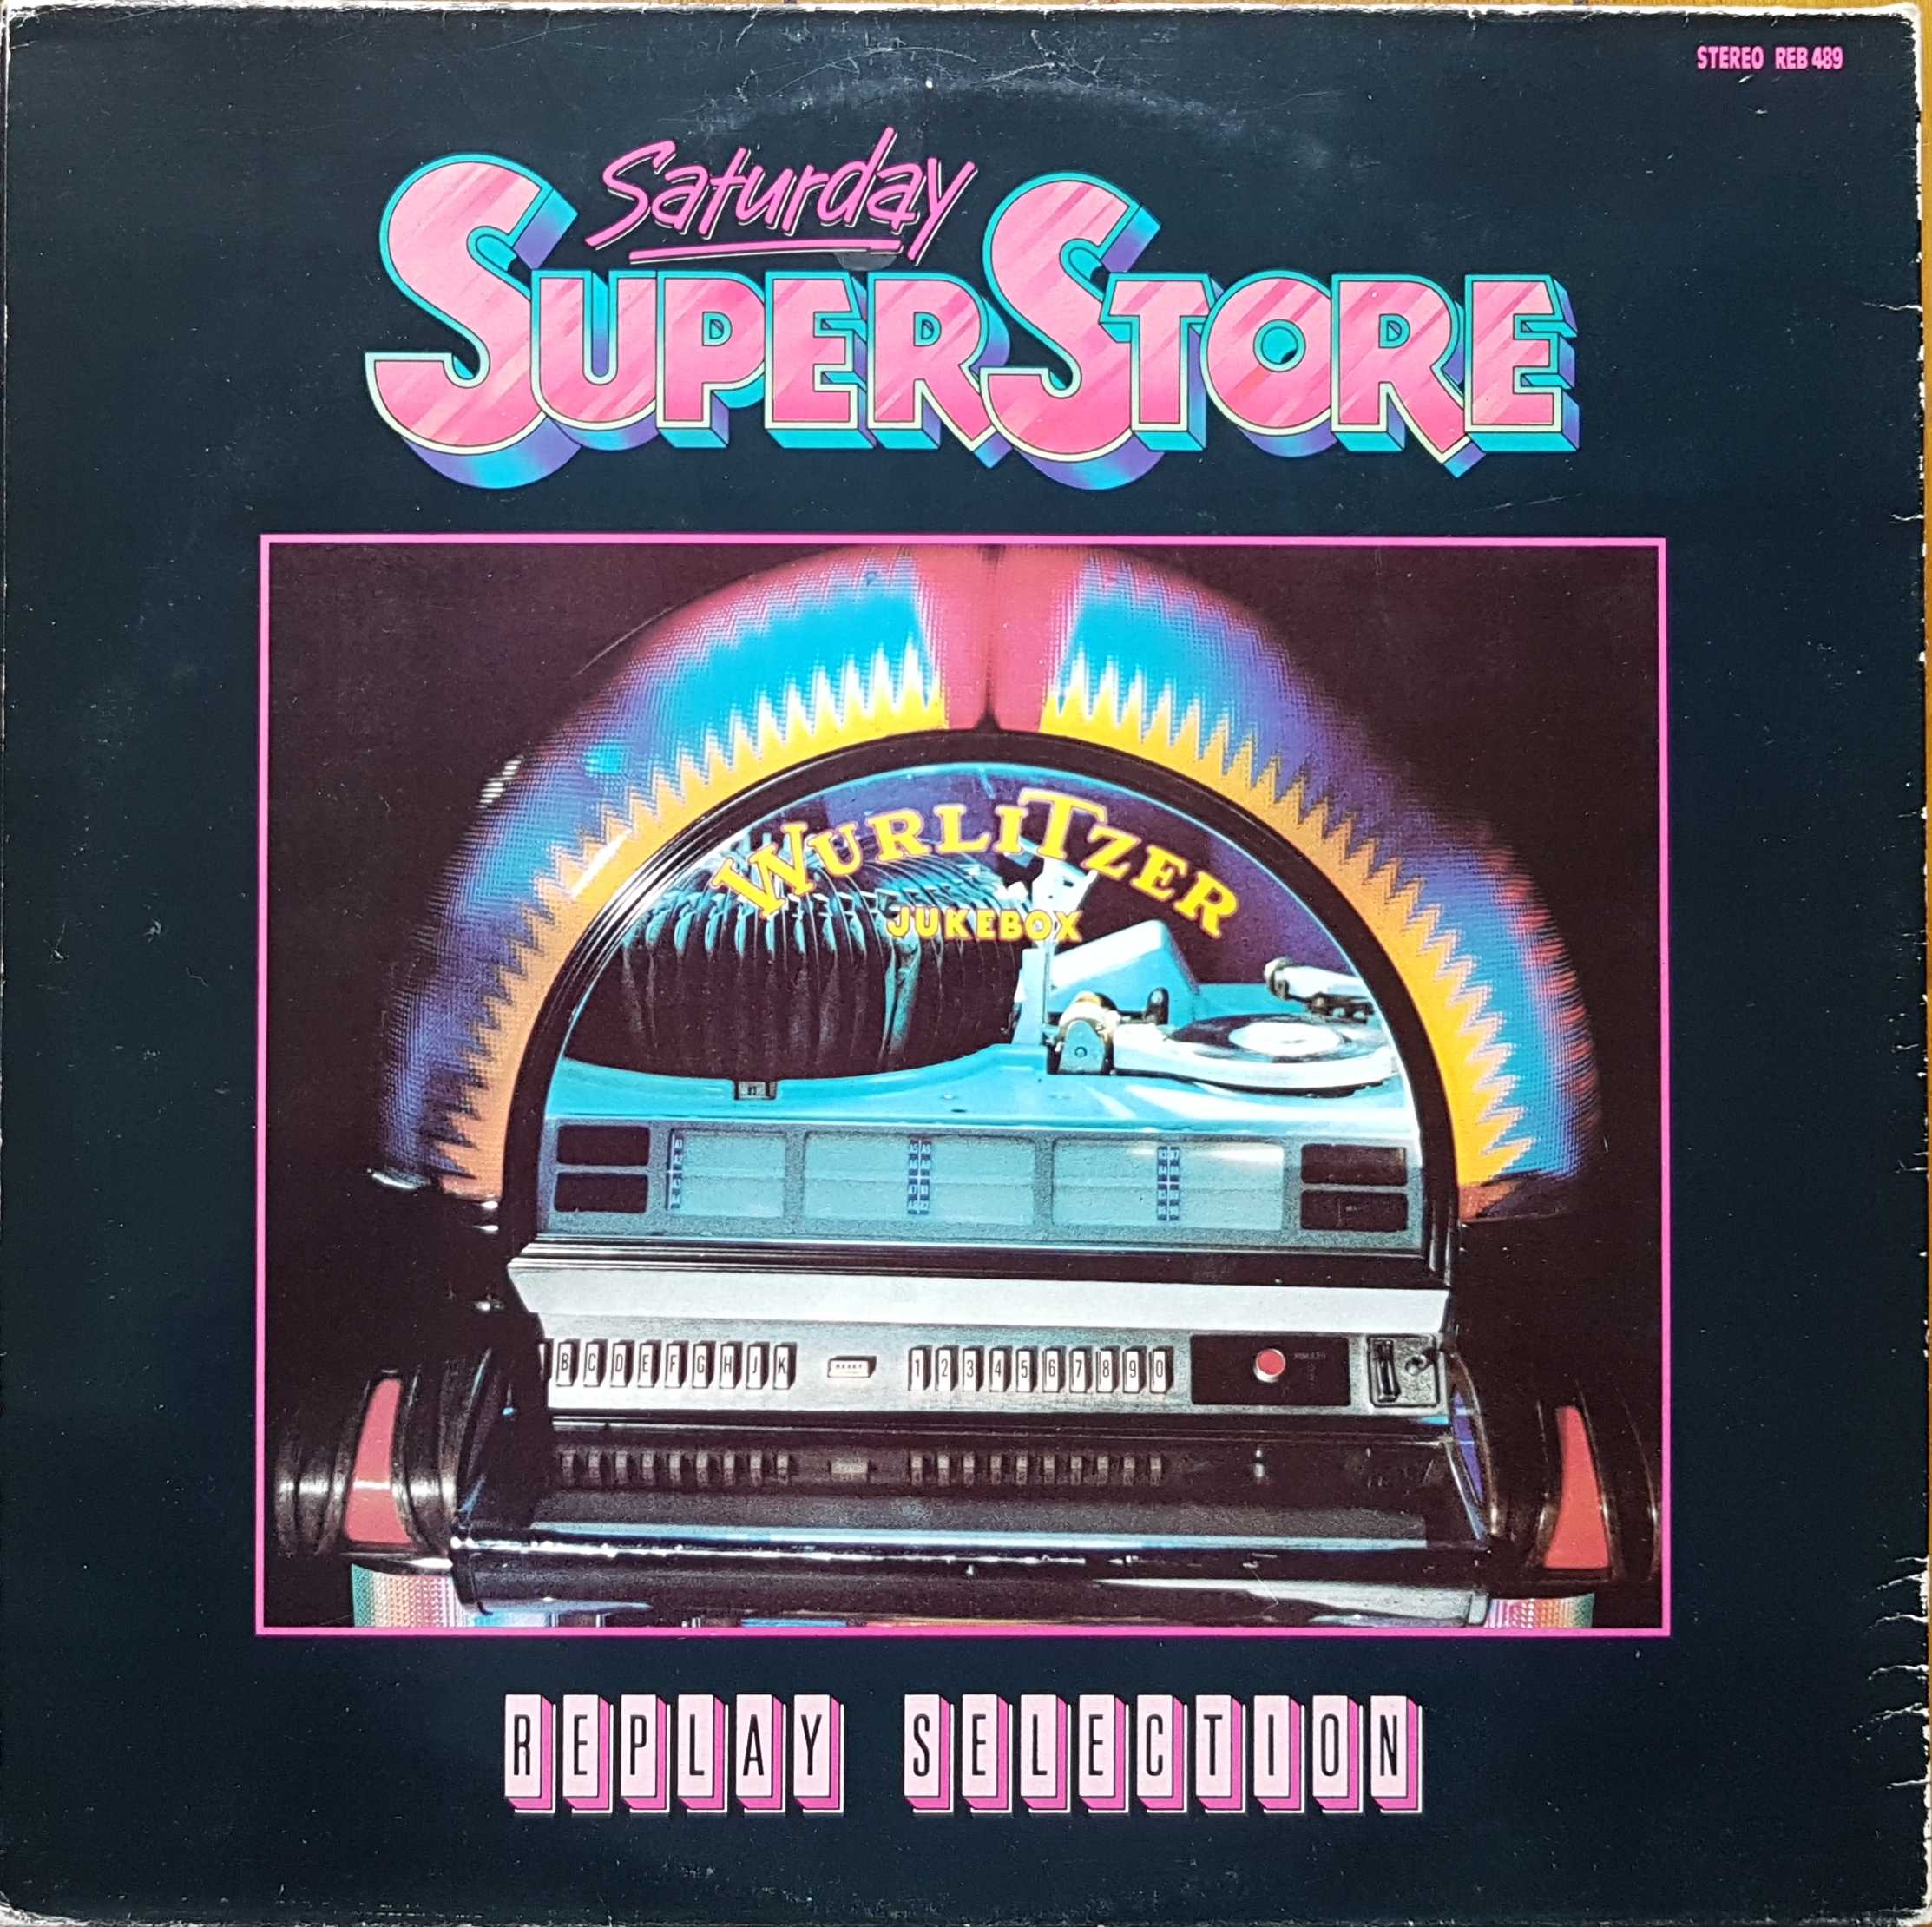 Picture of REB 489 Saturday superstore replay selection by artist Various from the BBC records and Tapes library